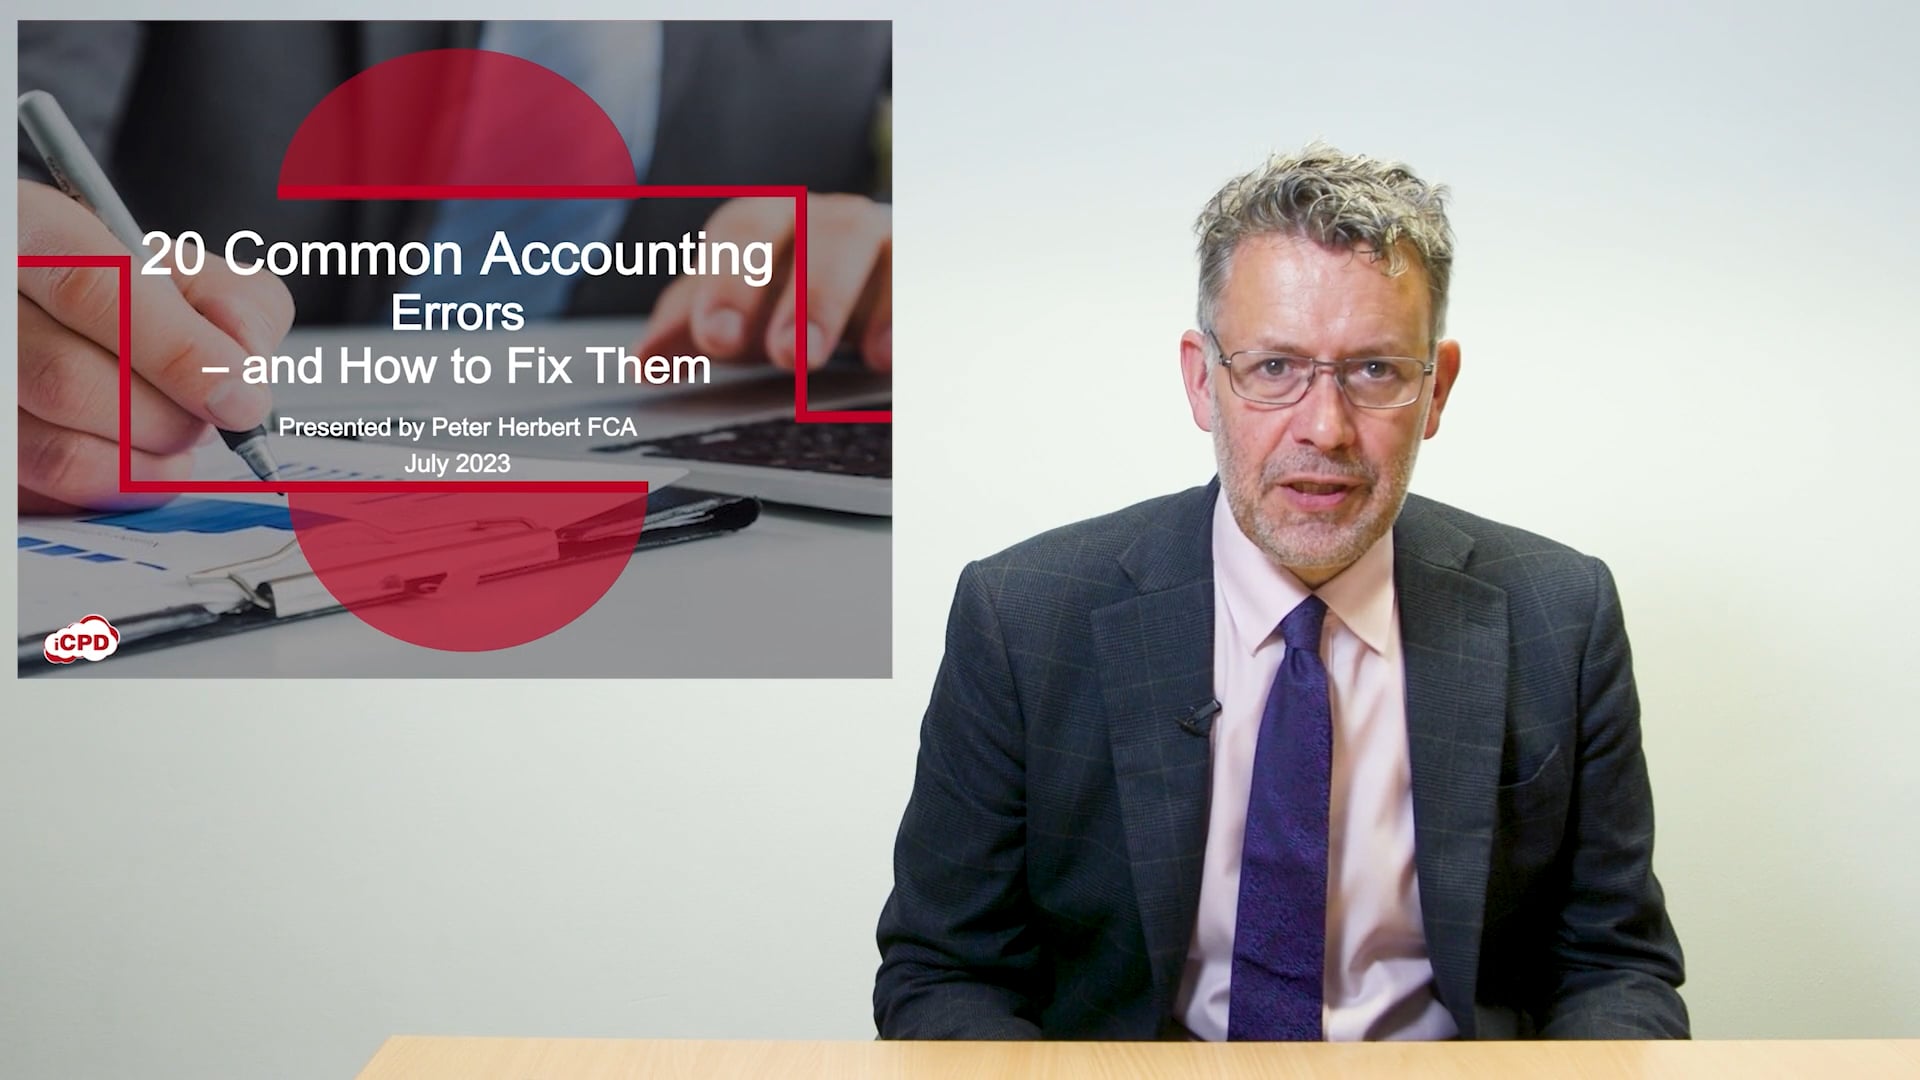 20 Common Accounting Errors -- and How to Fix Them - Section 1